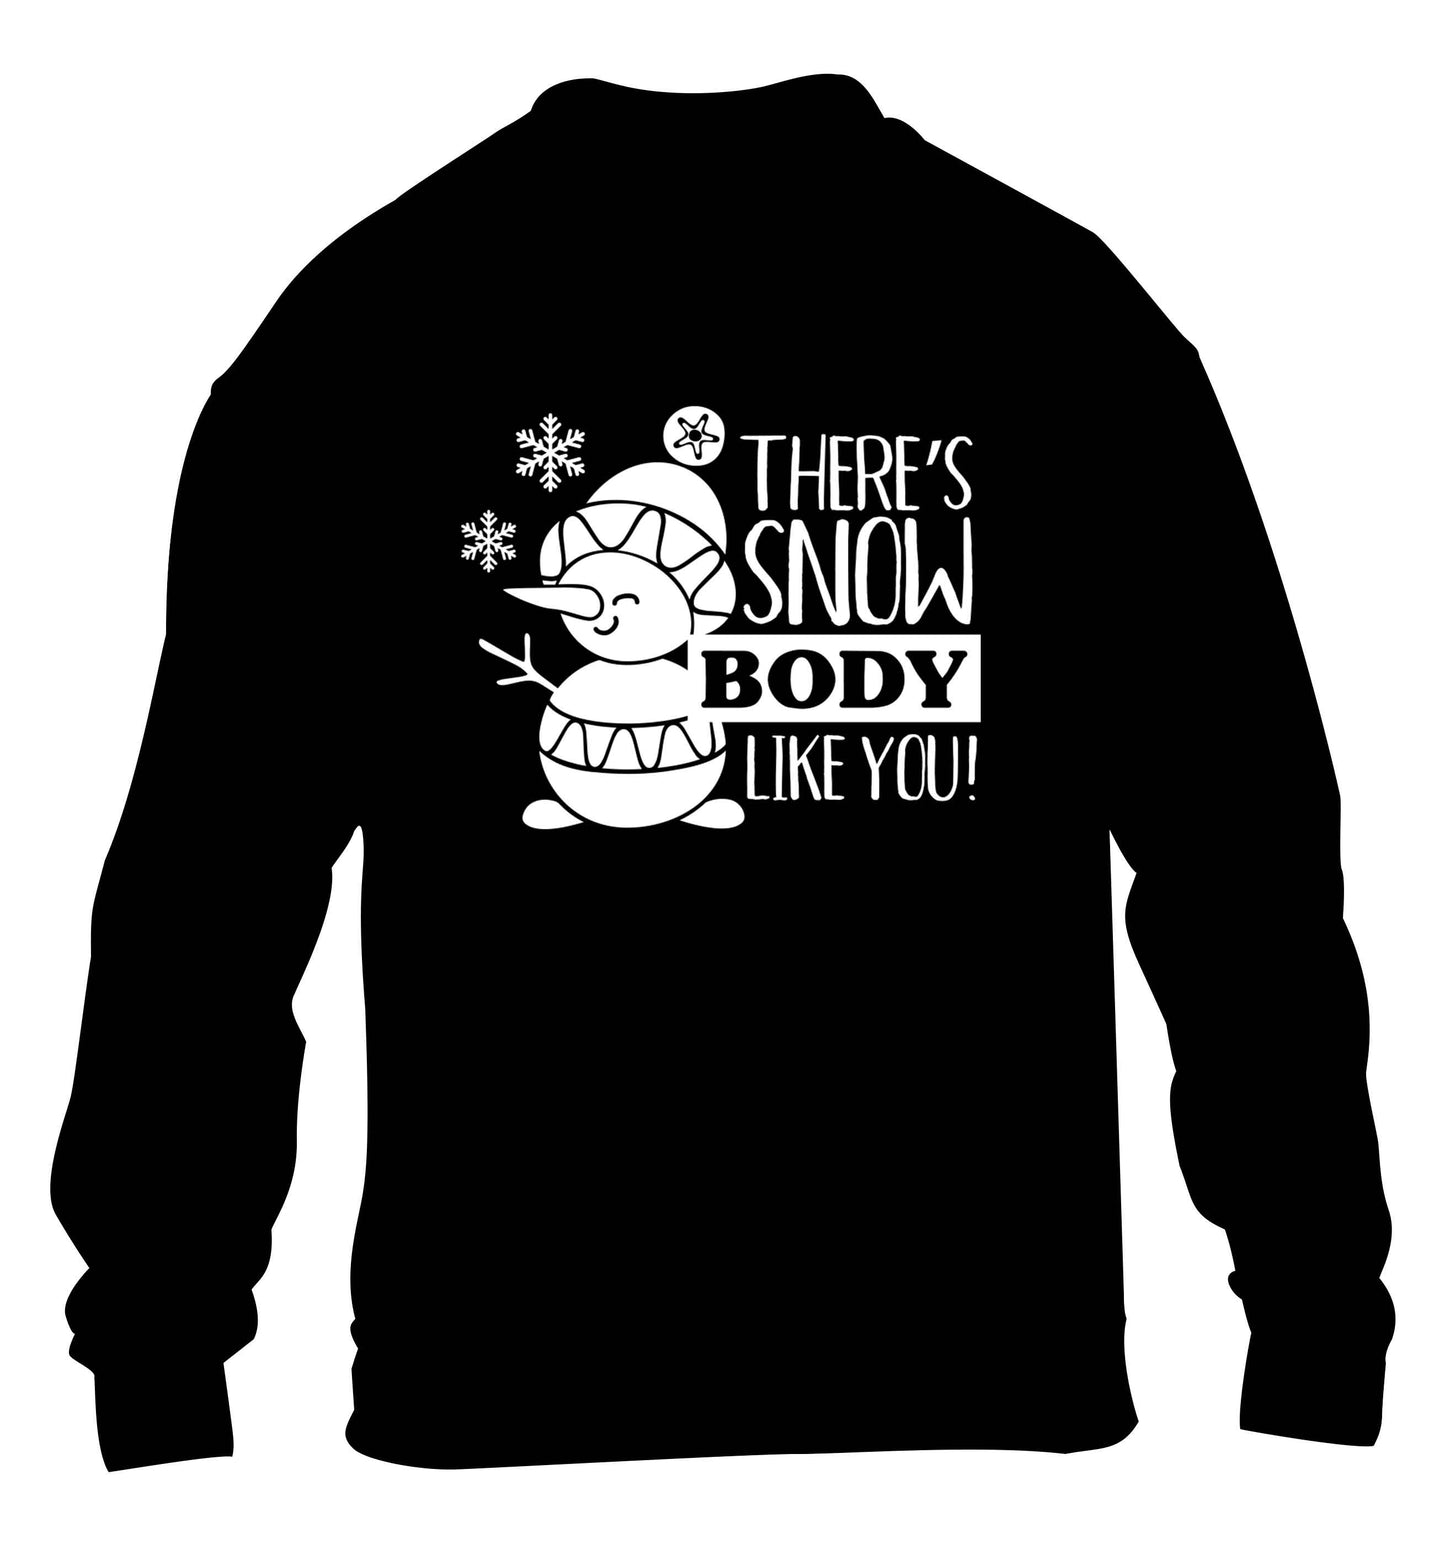 There's snow body like you children's black sweater 12-13 Years